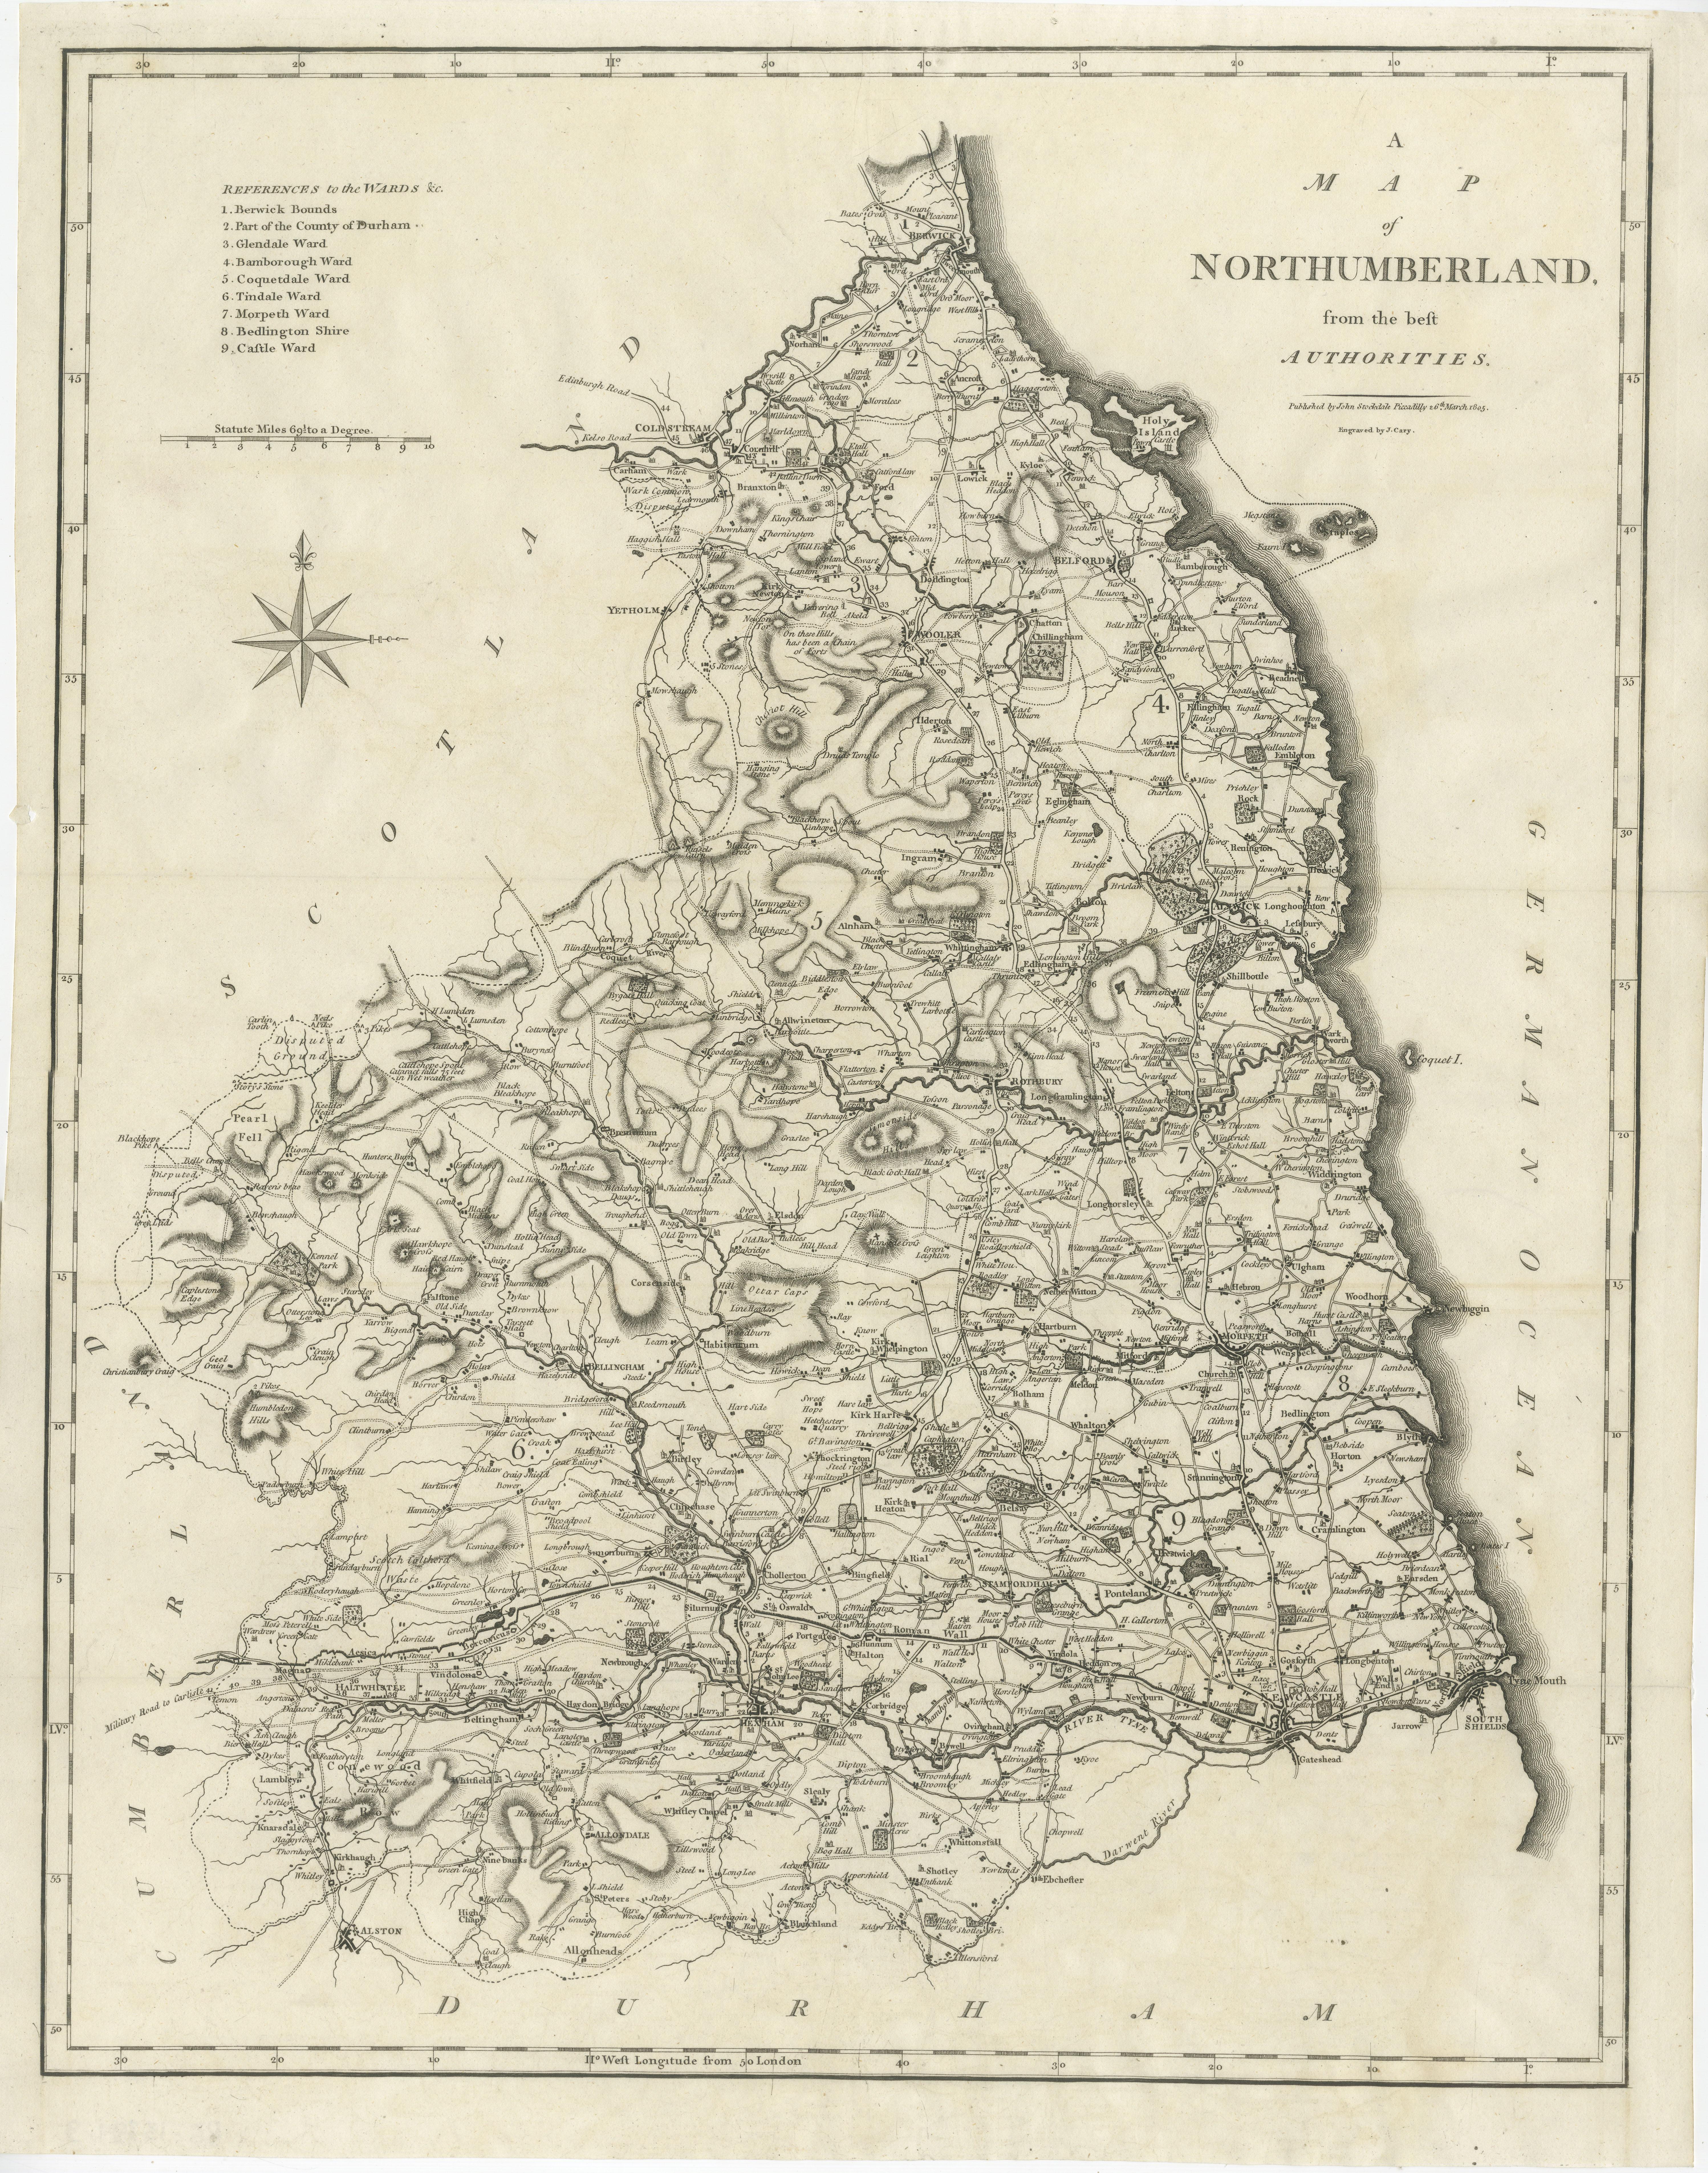 Antique map titled 'A Map of Northumberland from the best Authorities'. Original old county map of Northumberland, England. Engraved by John Cary. Originates from 'New British Atlas' by John Stockdale, published 1805. 

John Cary (1755-1835) was a